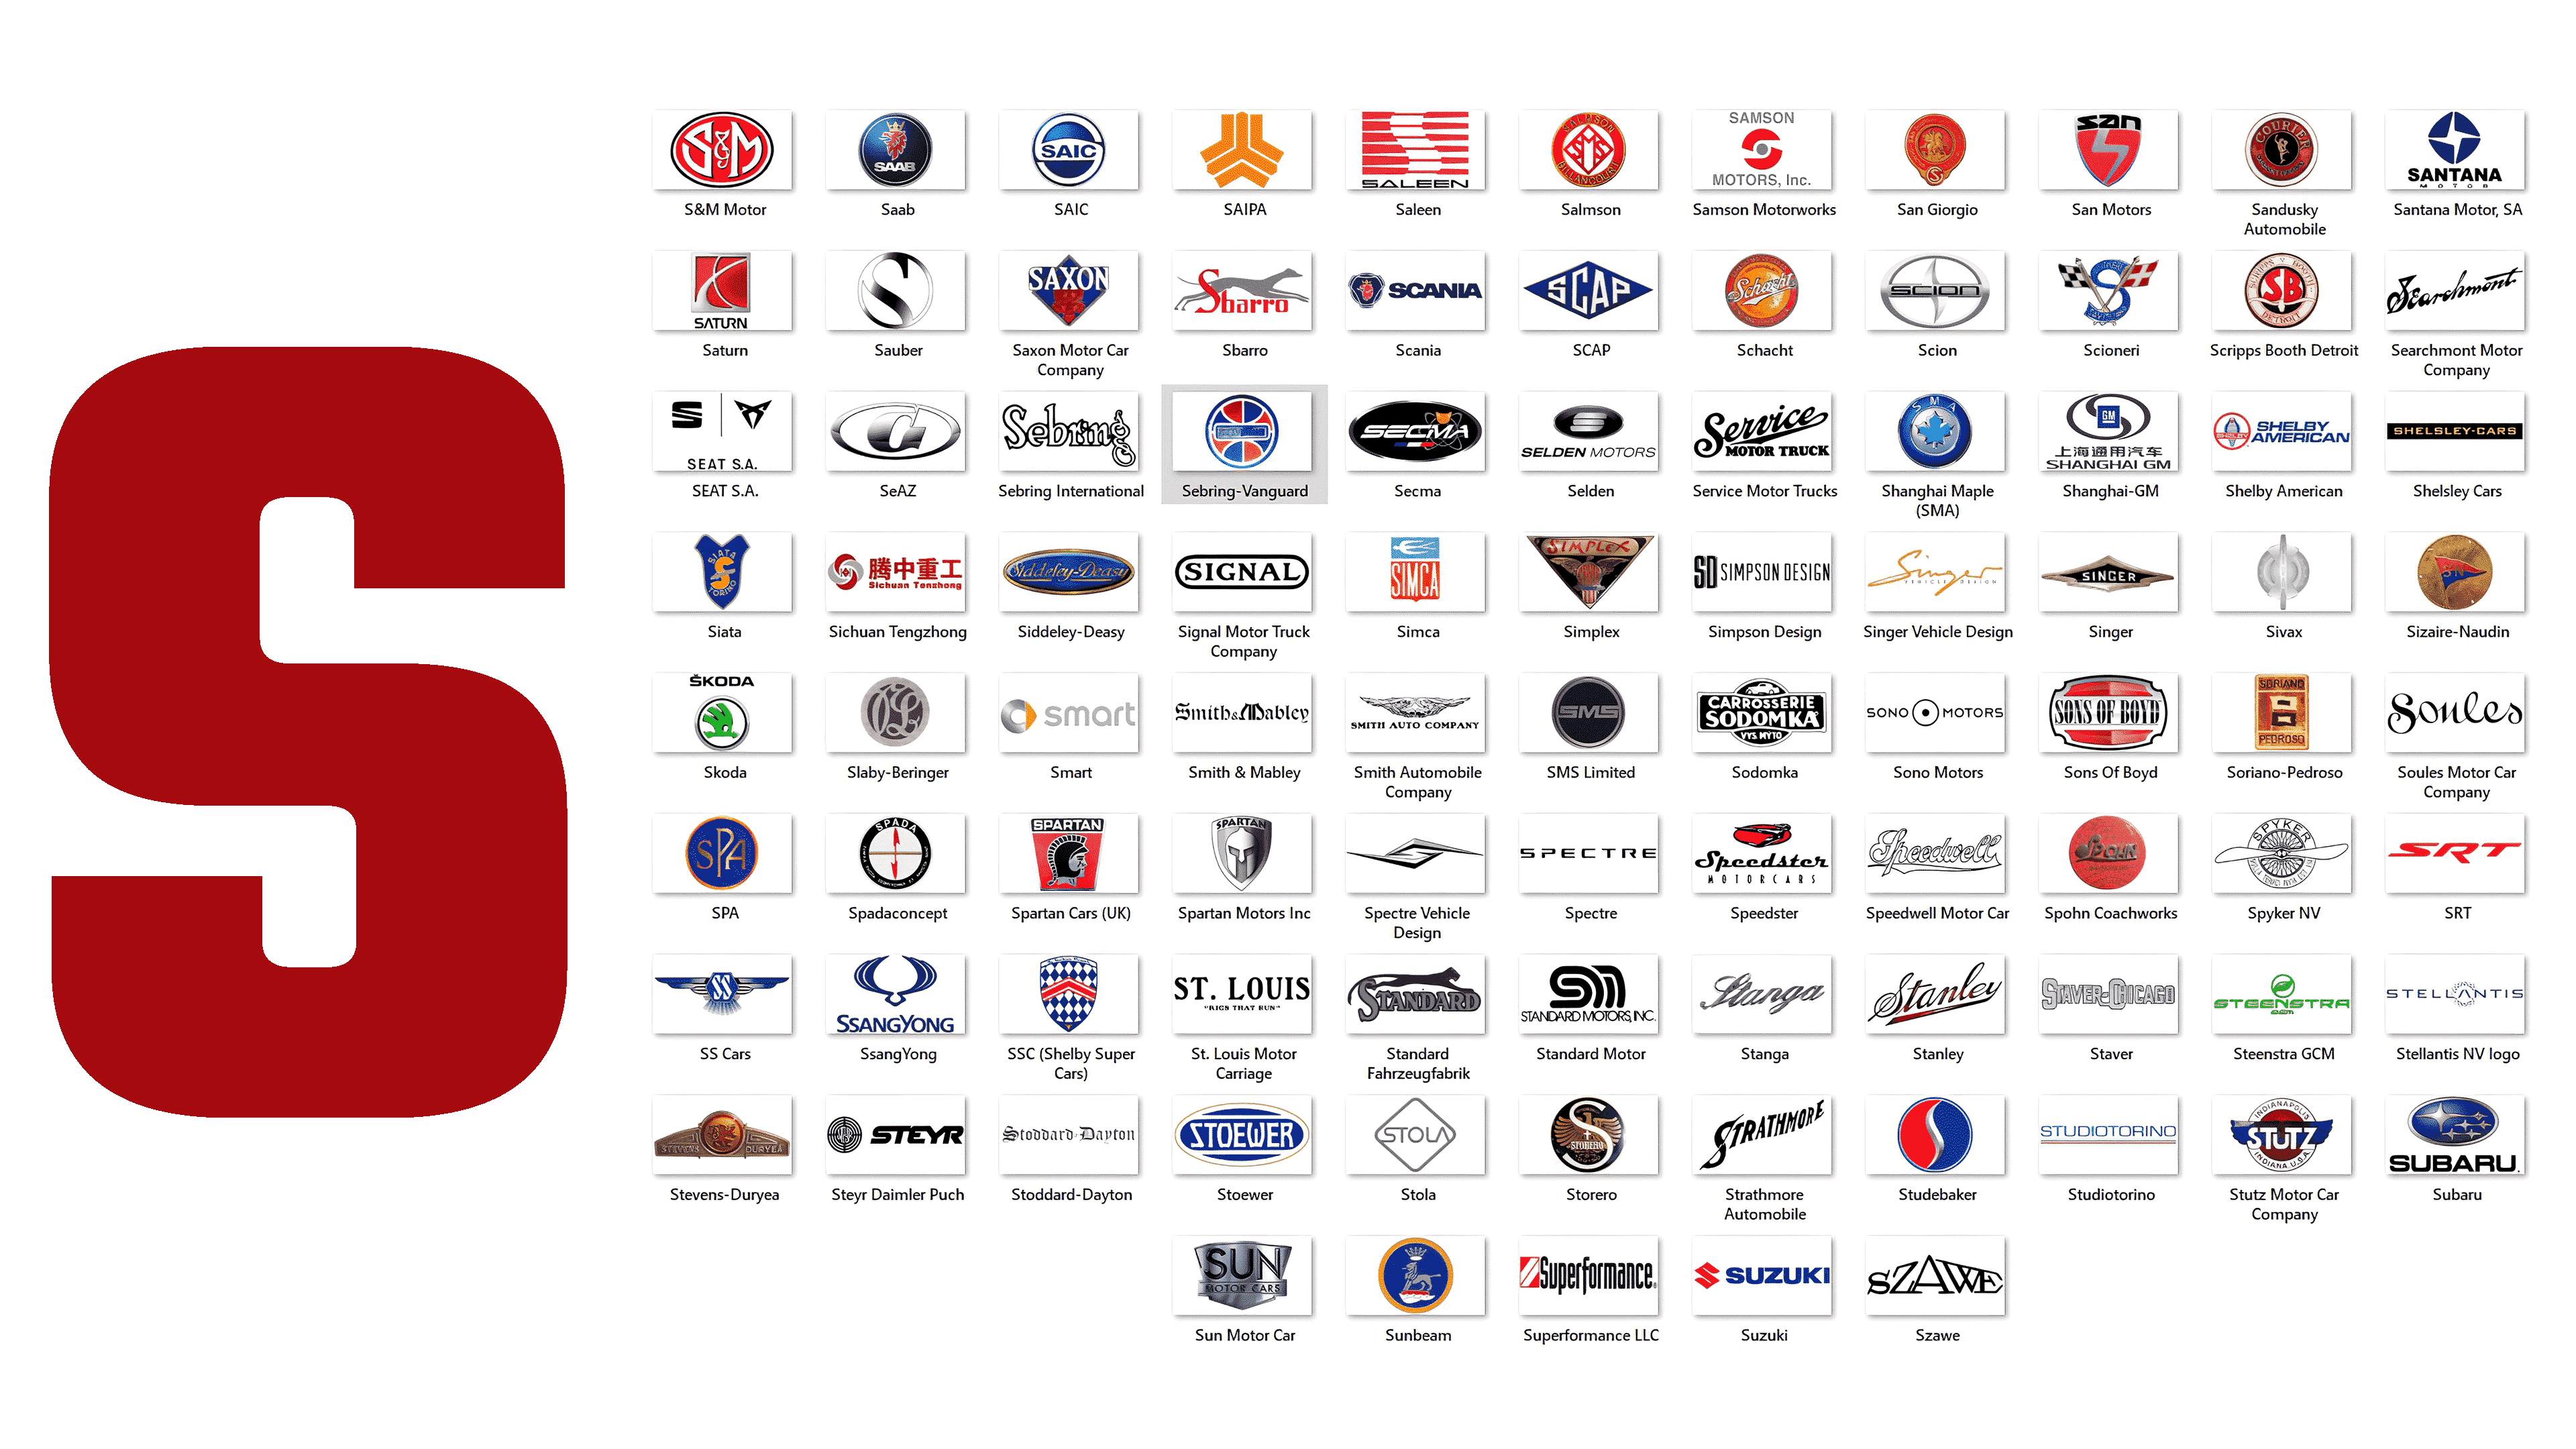 Best Logos - The most famous brands and company logos in the world